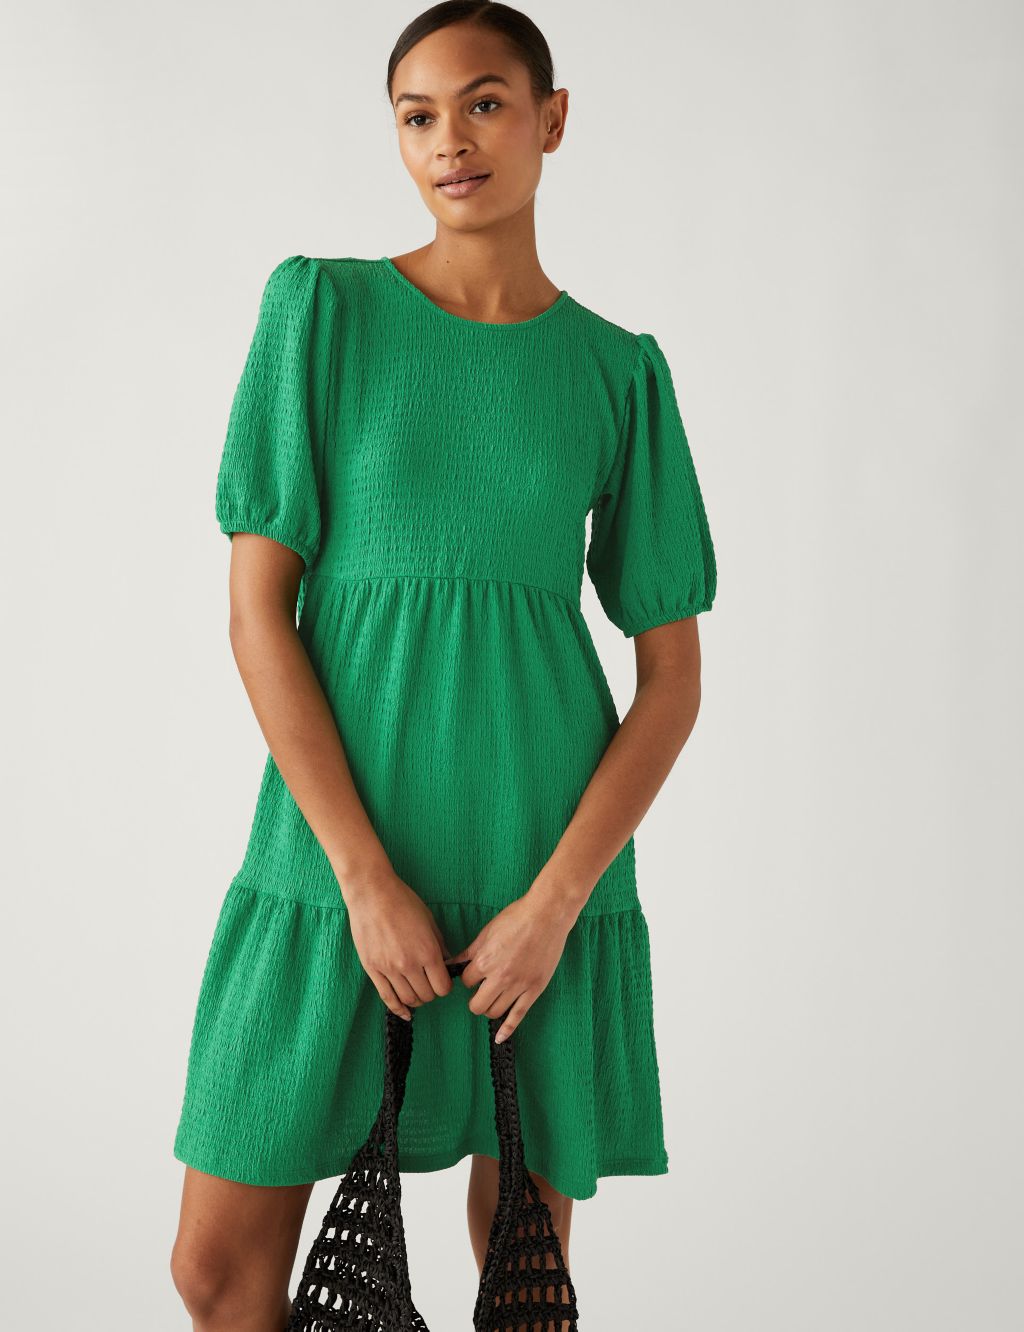 Jersey Textured Knee Length Tiered Dress image 1